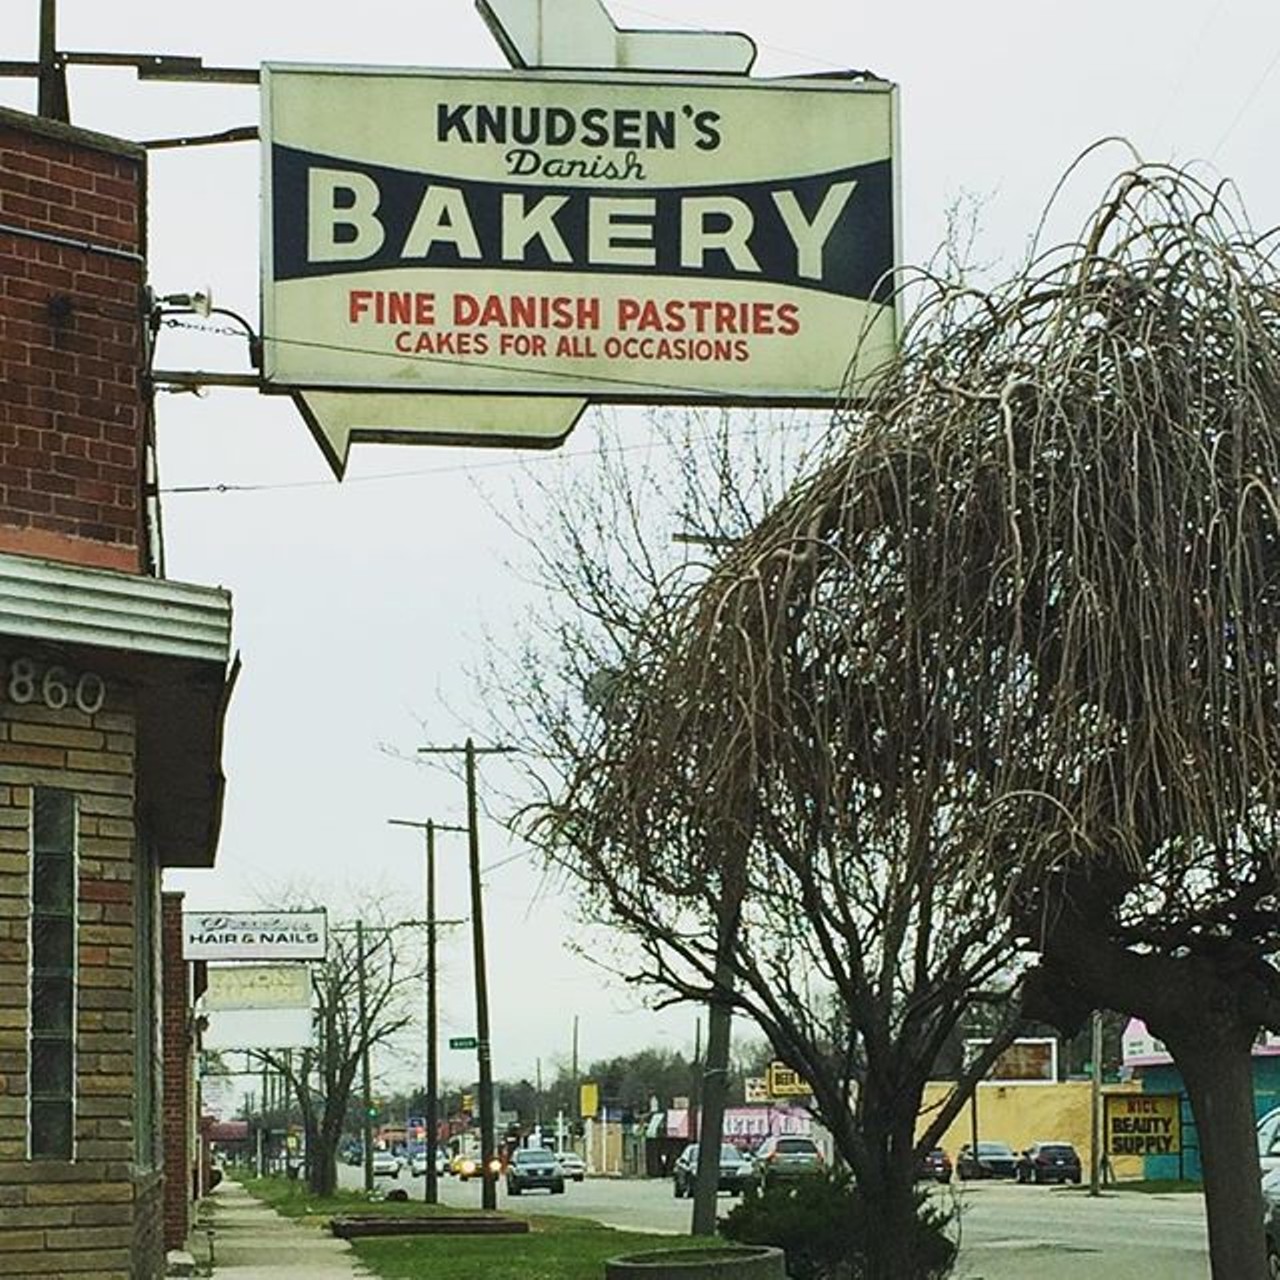 Knudsens Danish Bakery
18601 W McNichols Rd., Detroit; 313-535-0323
When it comes to cakes, there are so many different combinations to try, and Knudsens is the place to do it. Knudsens&#146; selection ranges from yummy paczki to gooey cinnamon rolls to their famous danishes. Pro tip: the buttercream frosting at Knudsens is said to be magical. 
Photo via Instagram user @edwinfabre